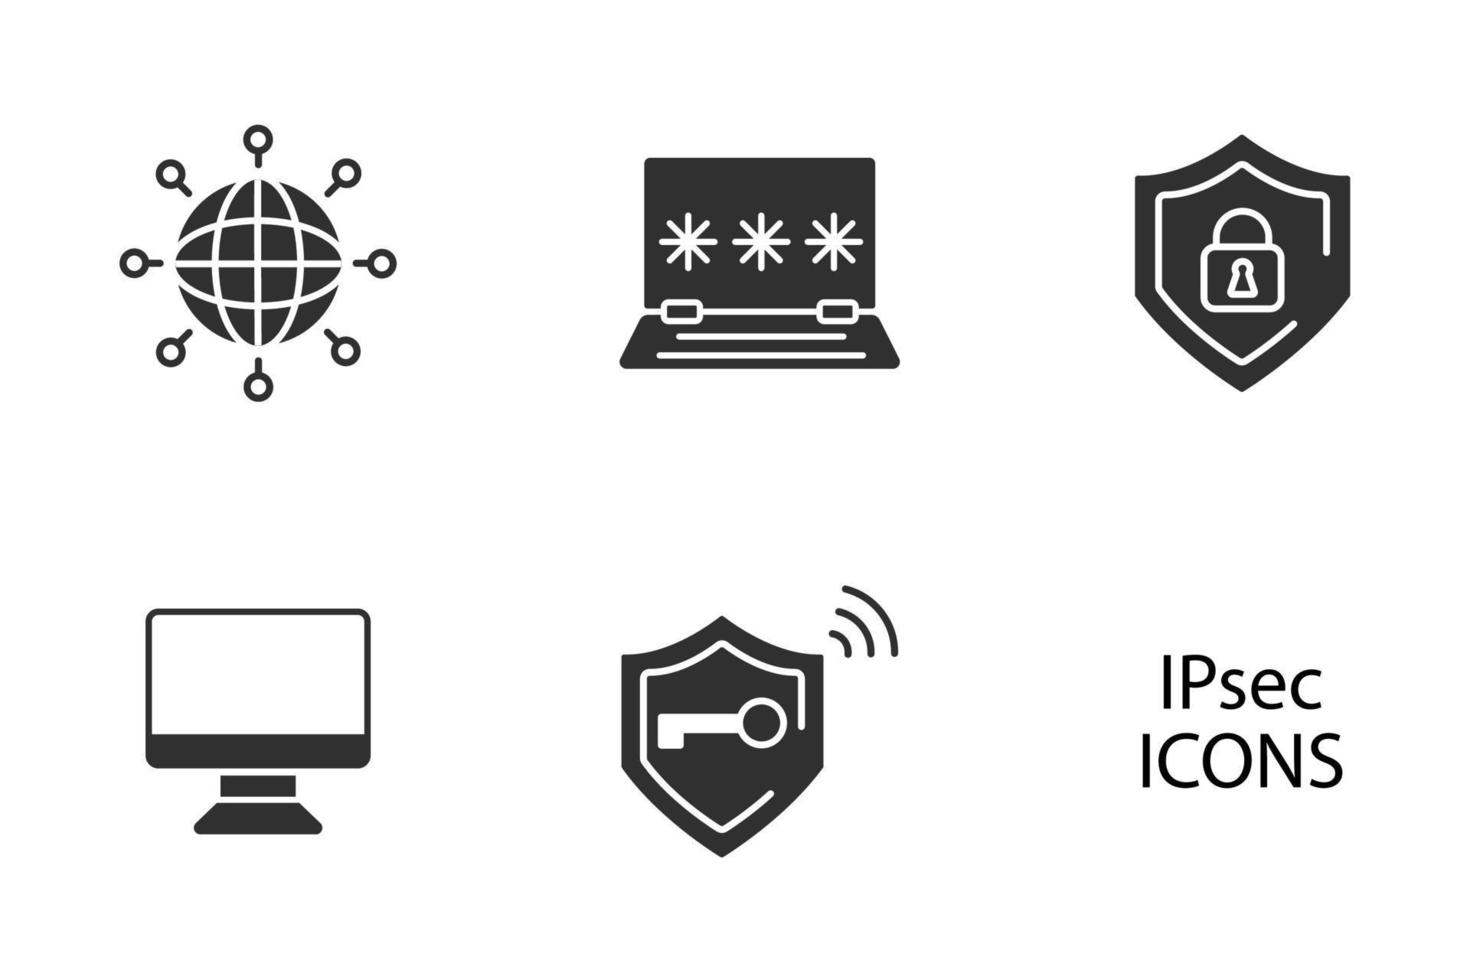 IPSec. Internet and Protection Network icons set . IPSec. Internet and Protection Network pack symbol vector elements for infographic web